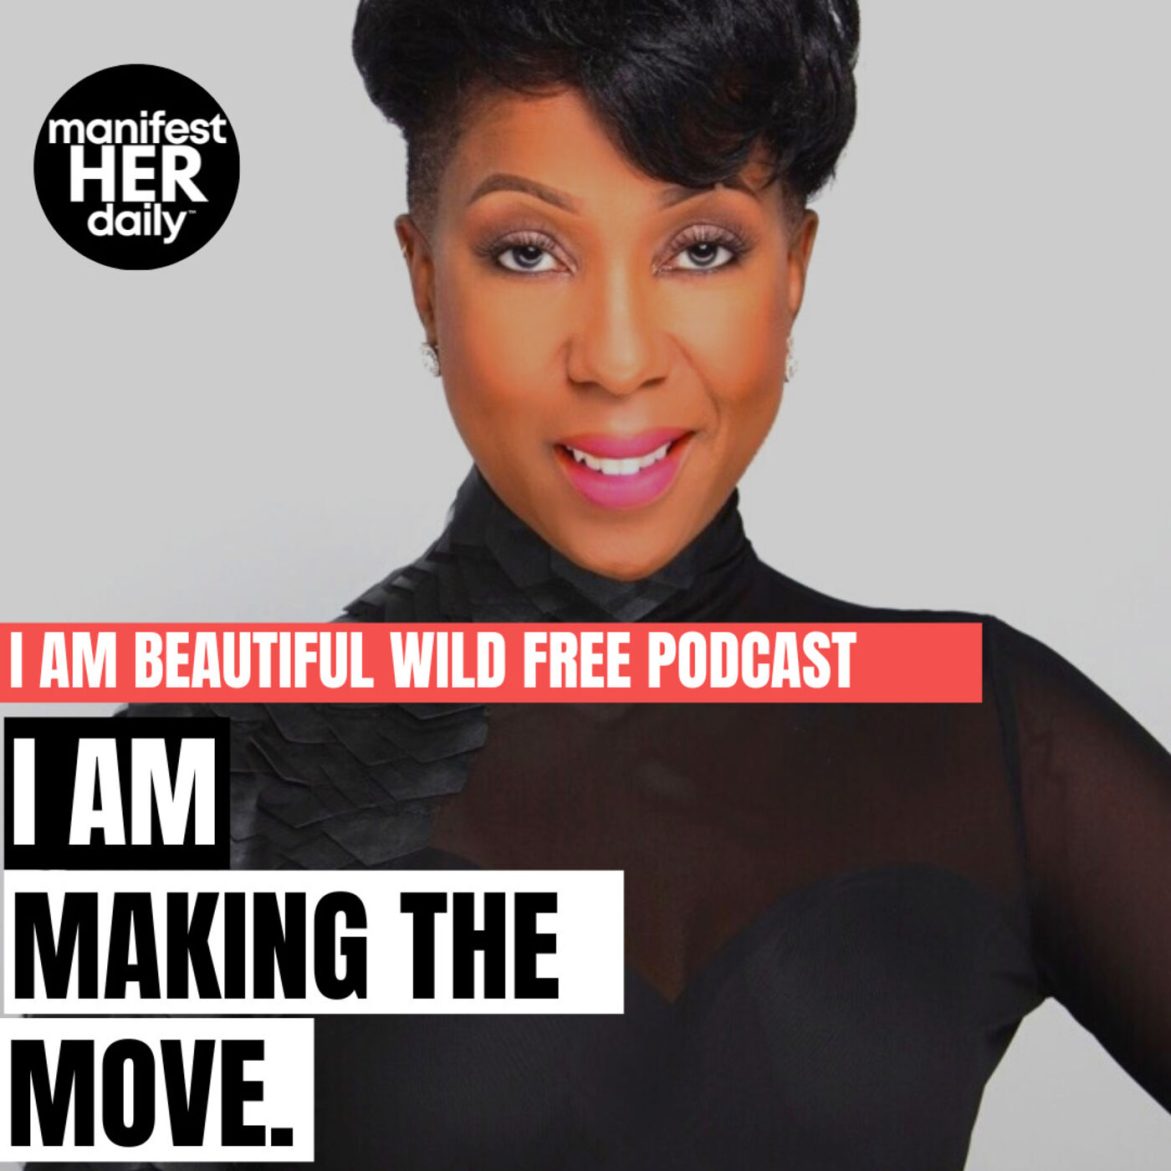 Black Podcasting - I AM MAKING THE MOVE: A Guided Meditation Podcast with Affirmations from the Bible by BWFwoman x manifestHER Daily